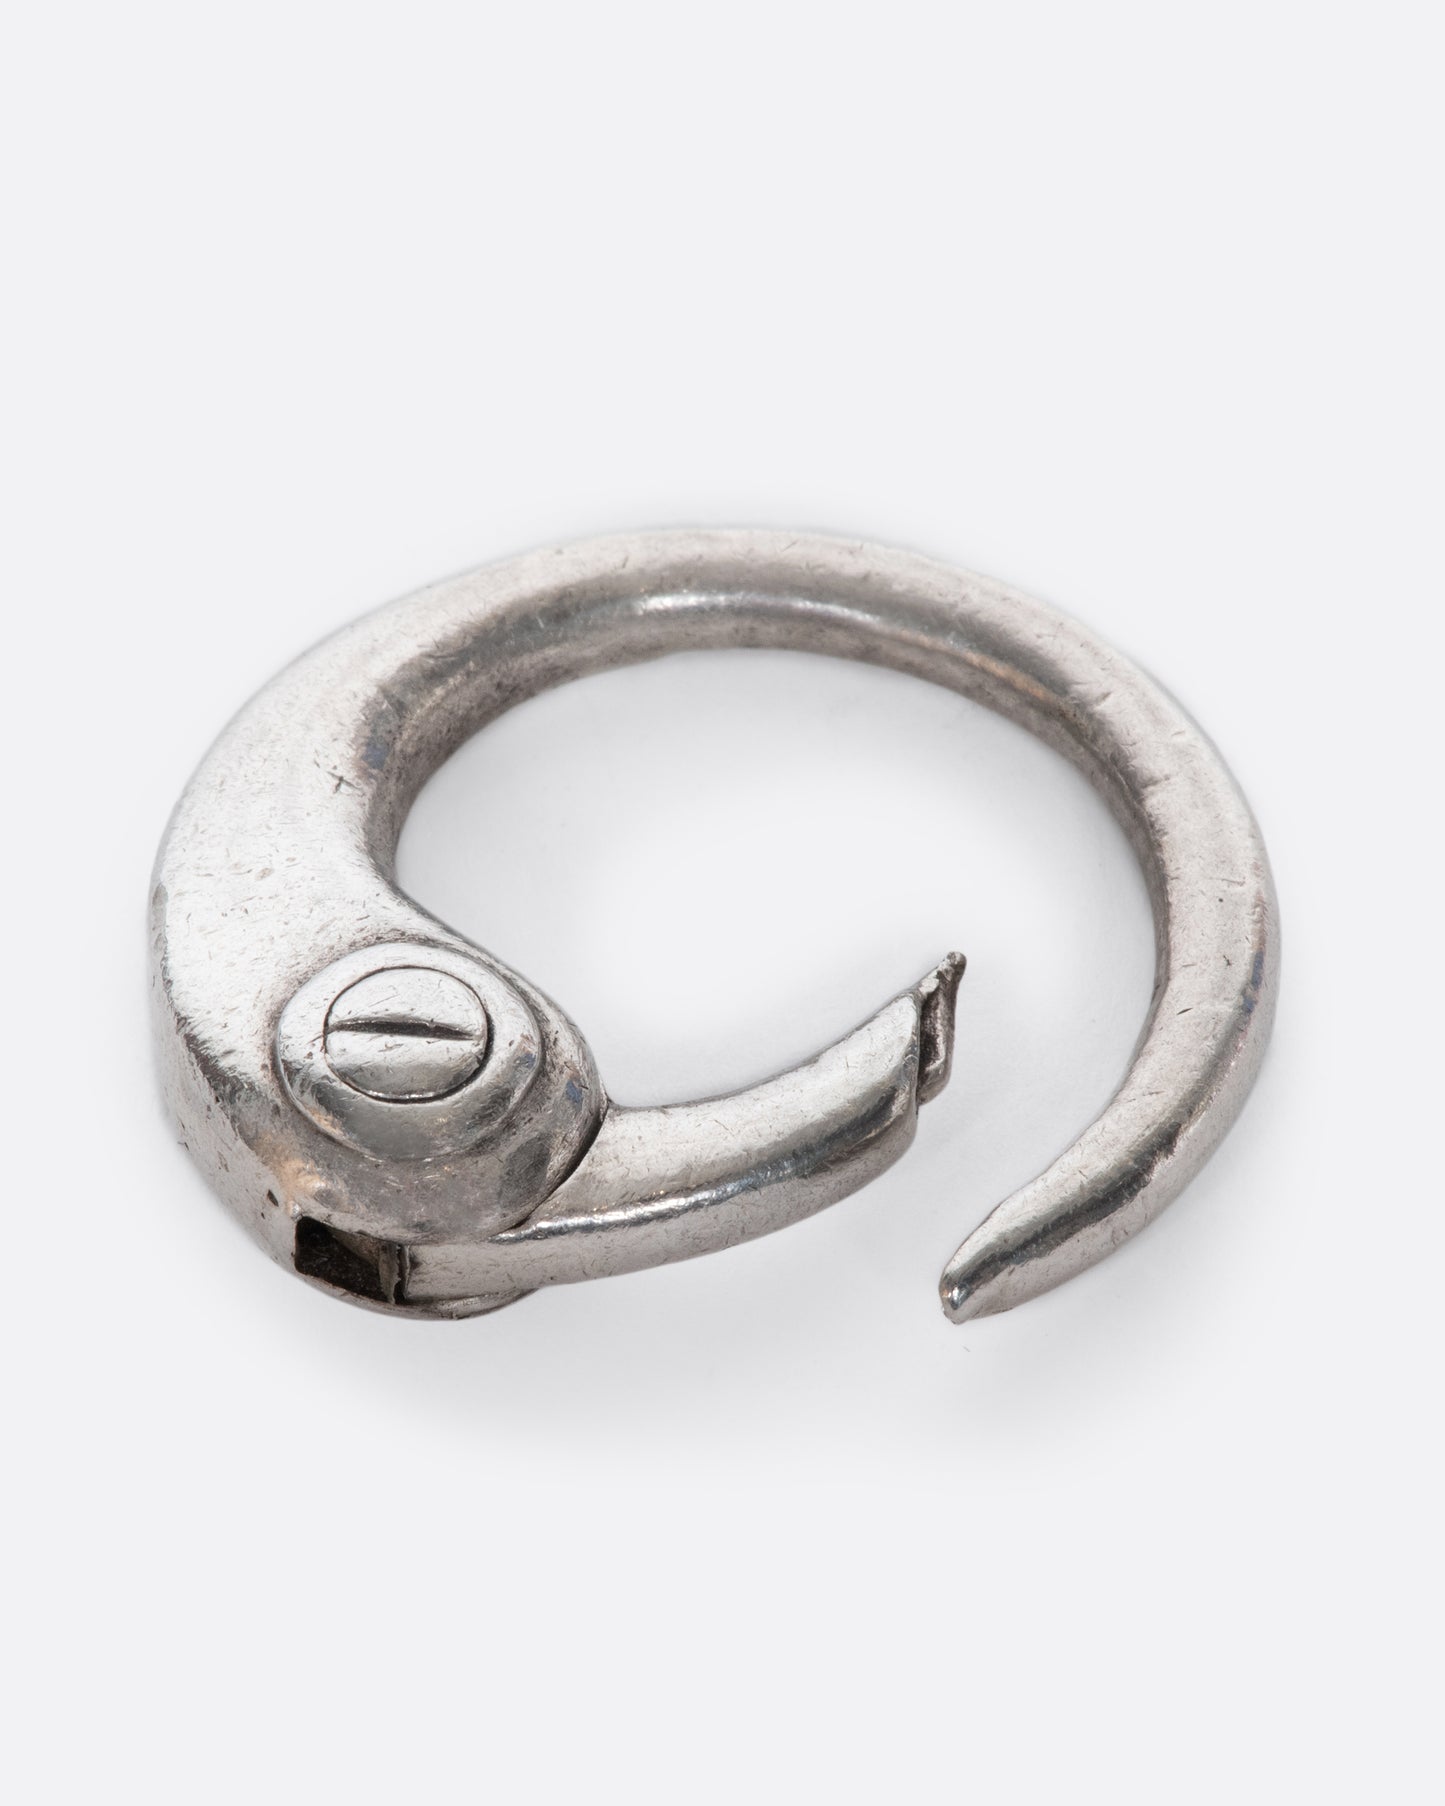 You'll be hard-pressed to find a more chic place for your keys than this vintage flamingo key ring. Just press in its beak to lock in or release your keys.